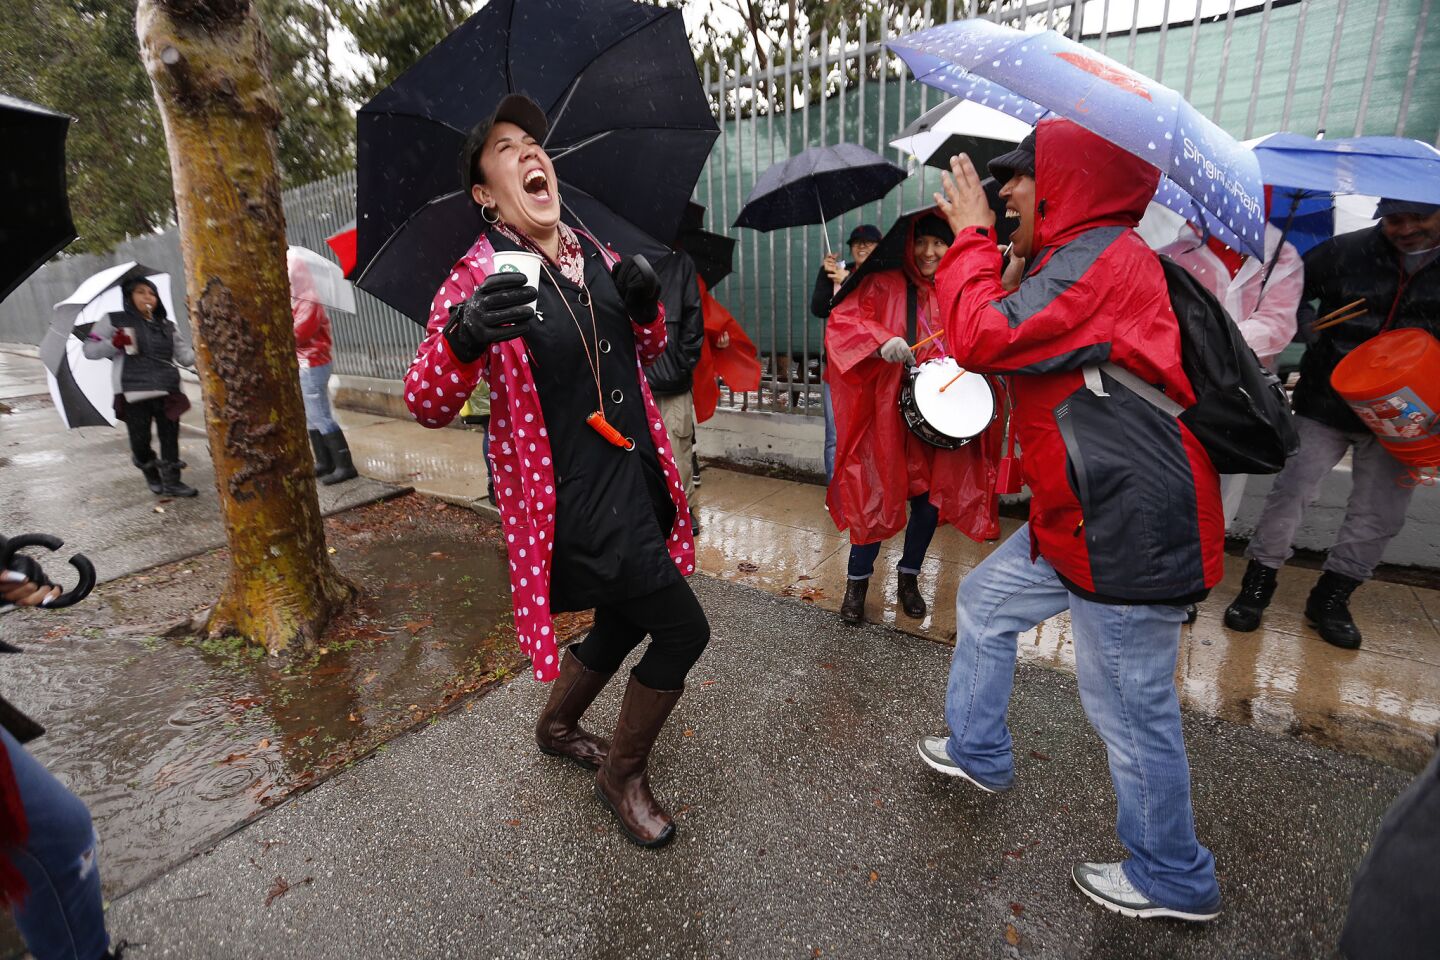 Anavelia Valencia, left, and Courtney Moore, right, teachers at 99th Street Elementary school, perform a "rain dance" on the picket line in South Los Angeles.